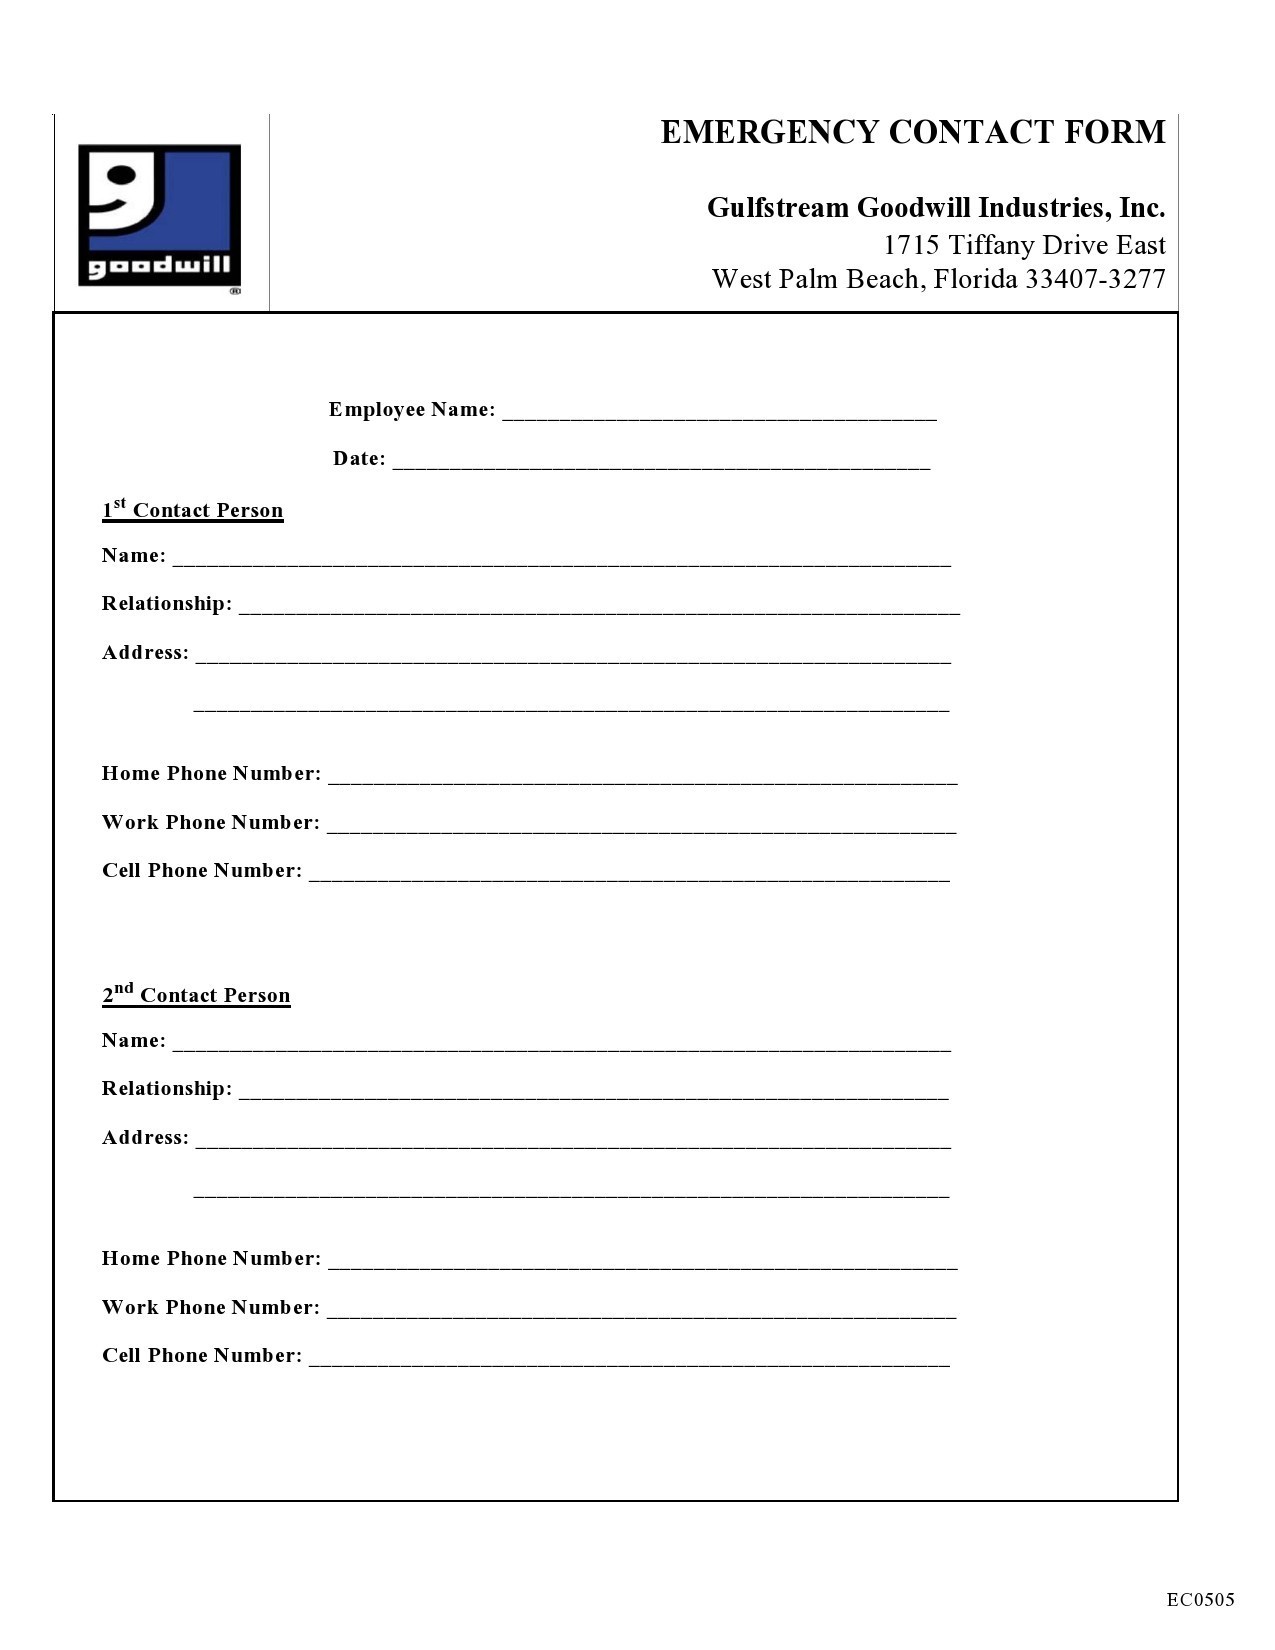 Free emergency contact form 27